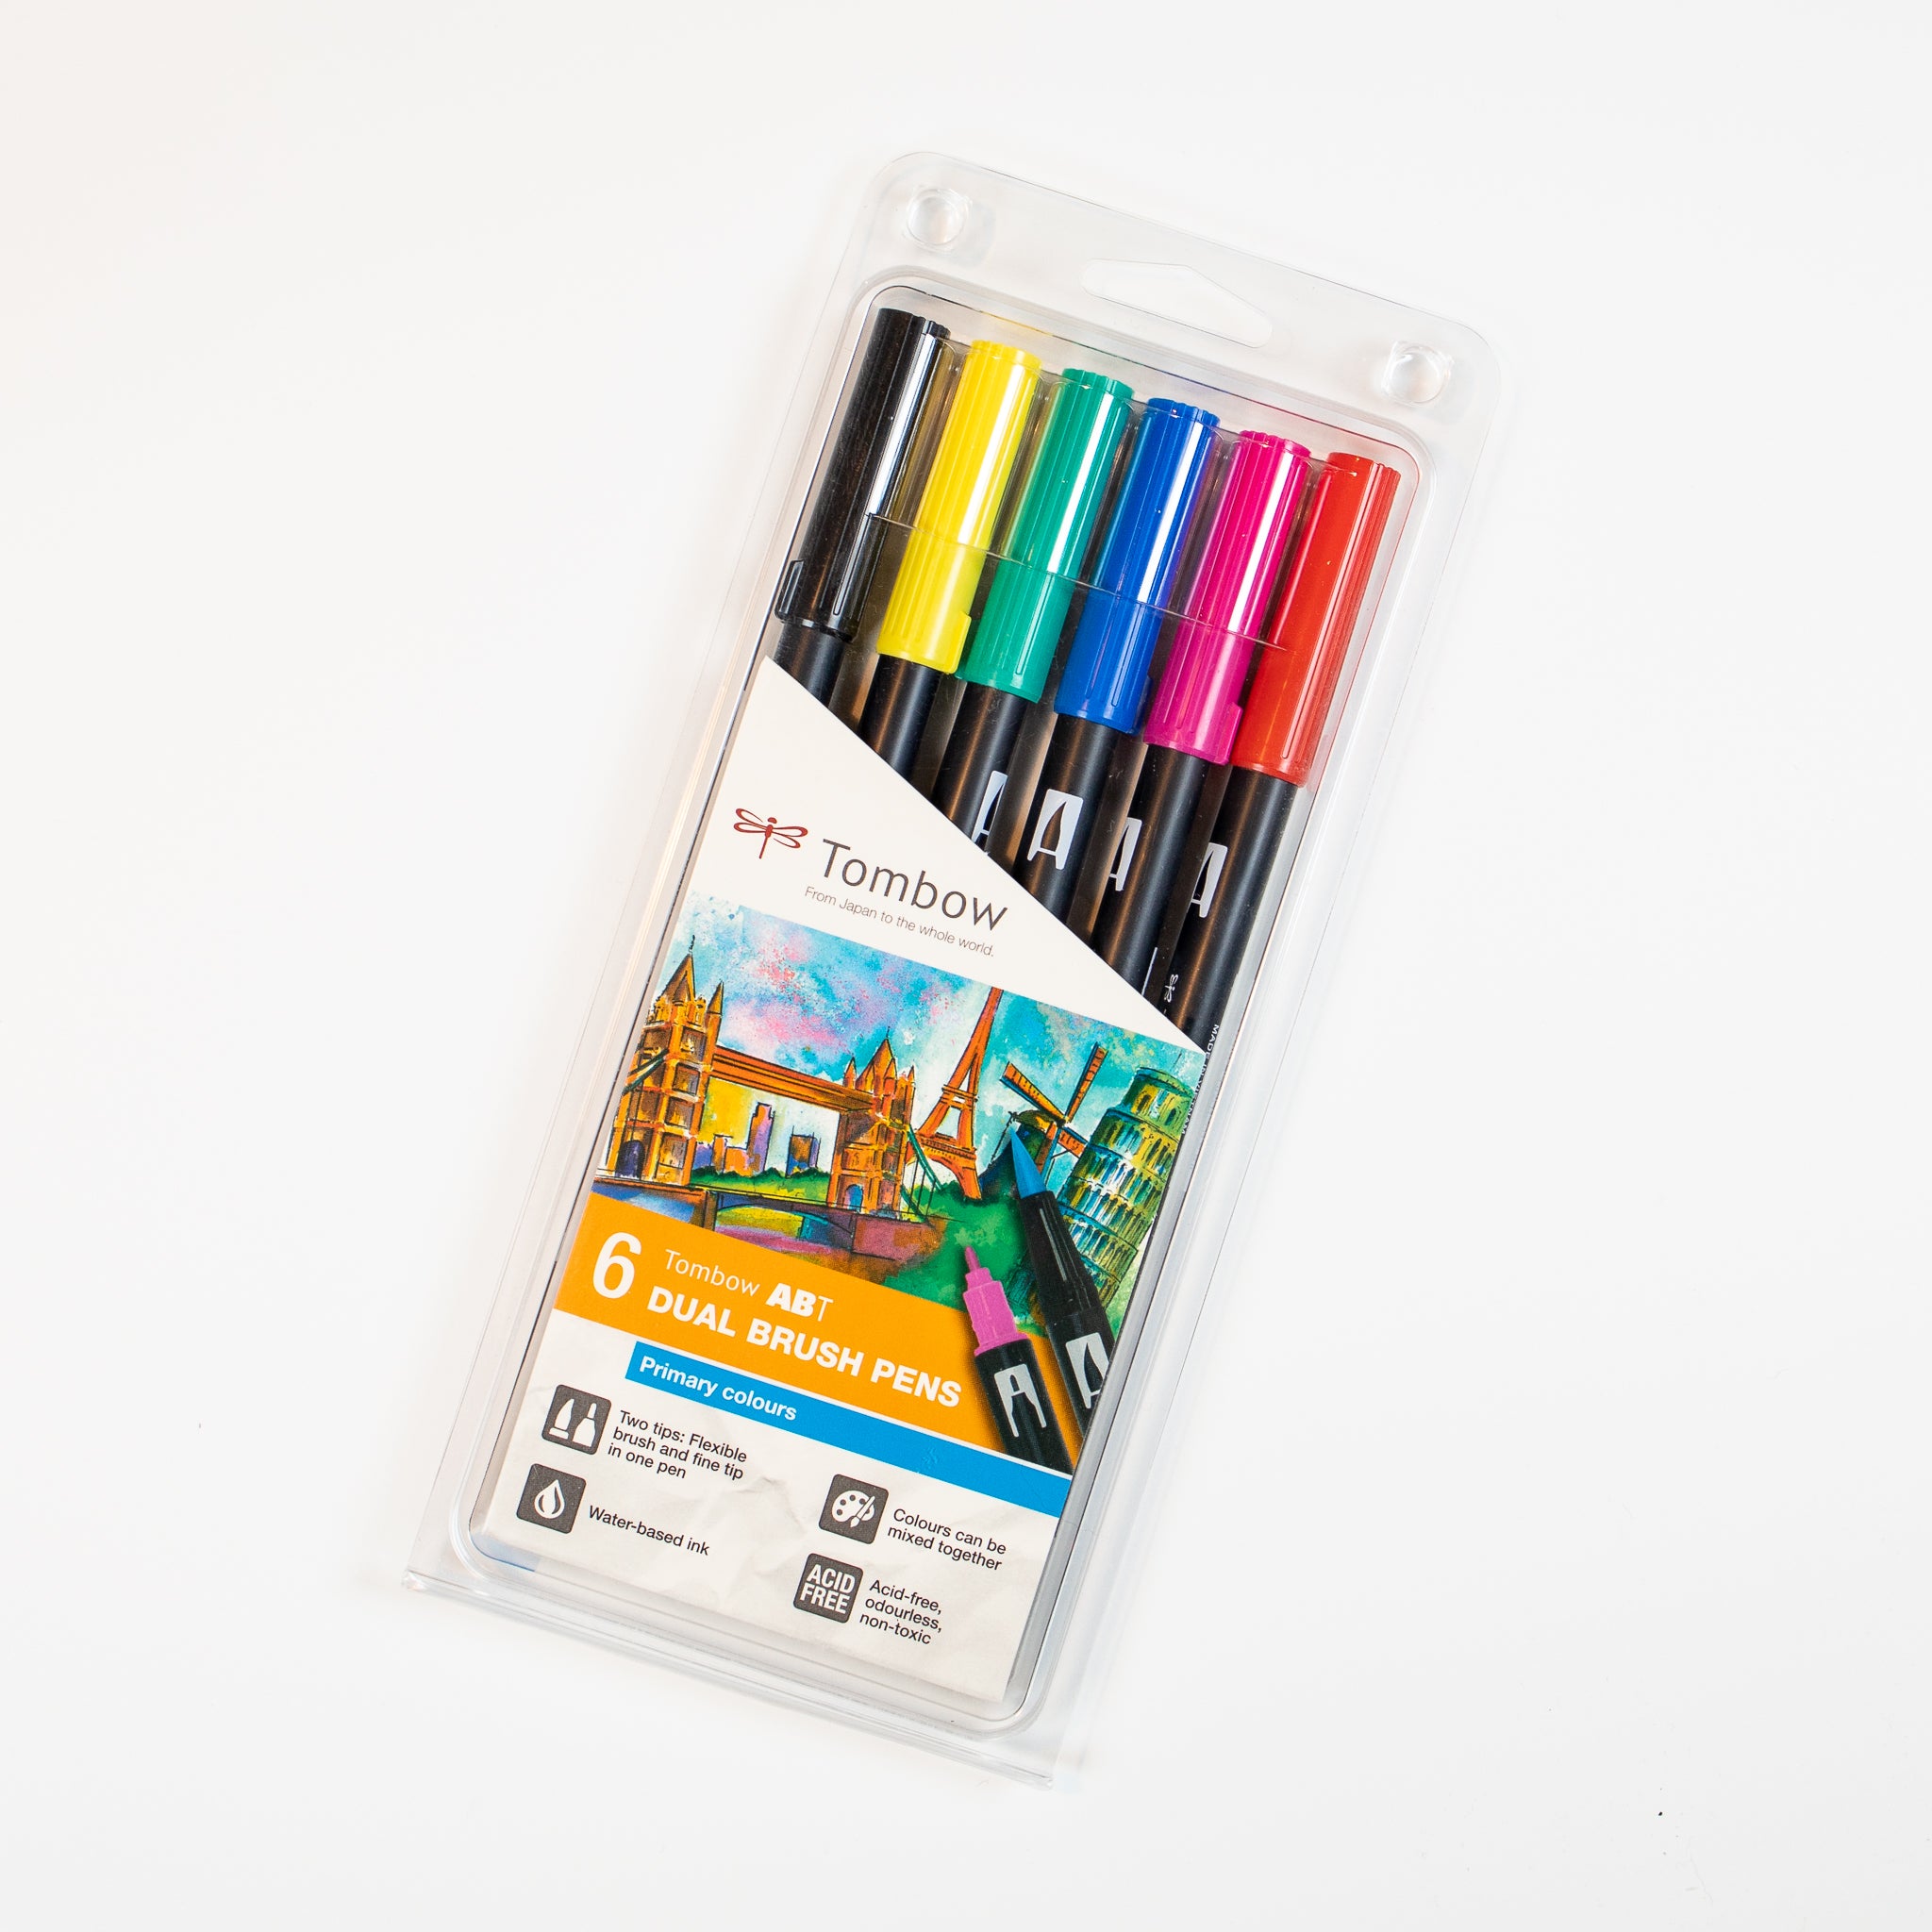 Tombow Lettering Set – Perfect Paper Company